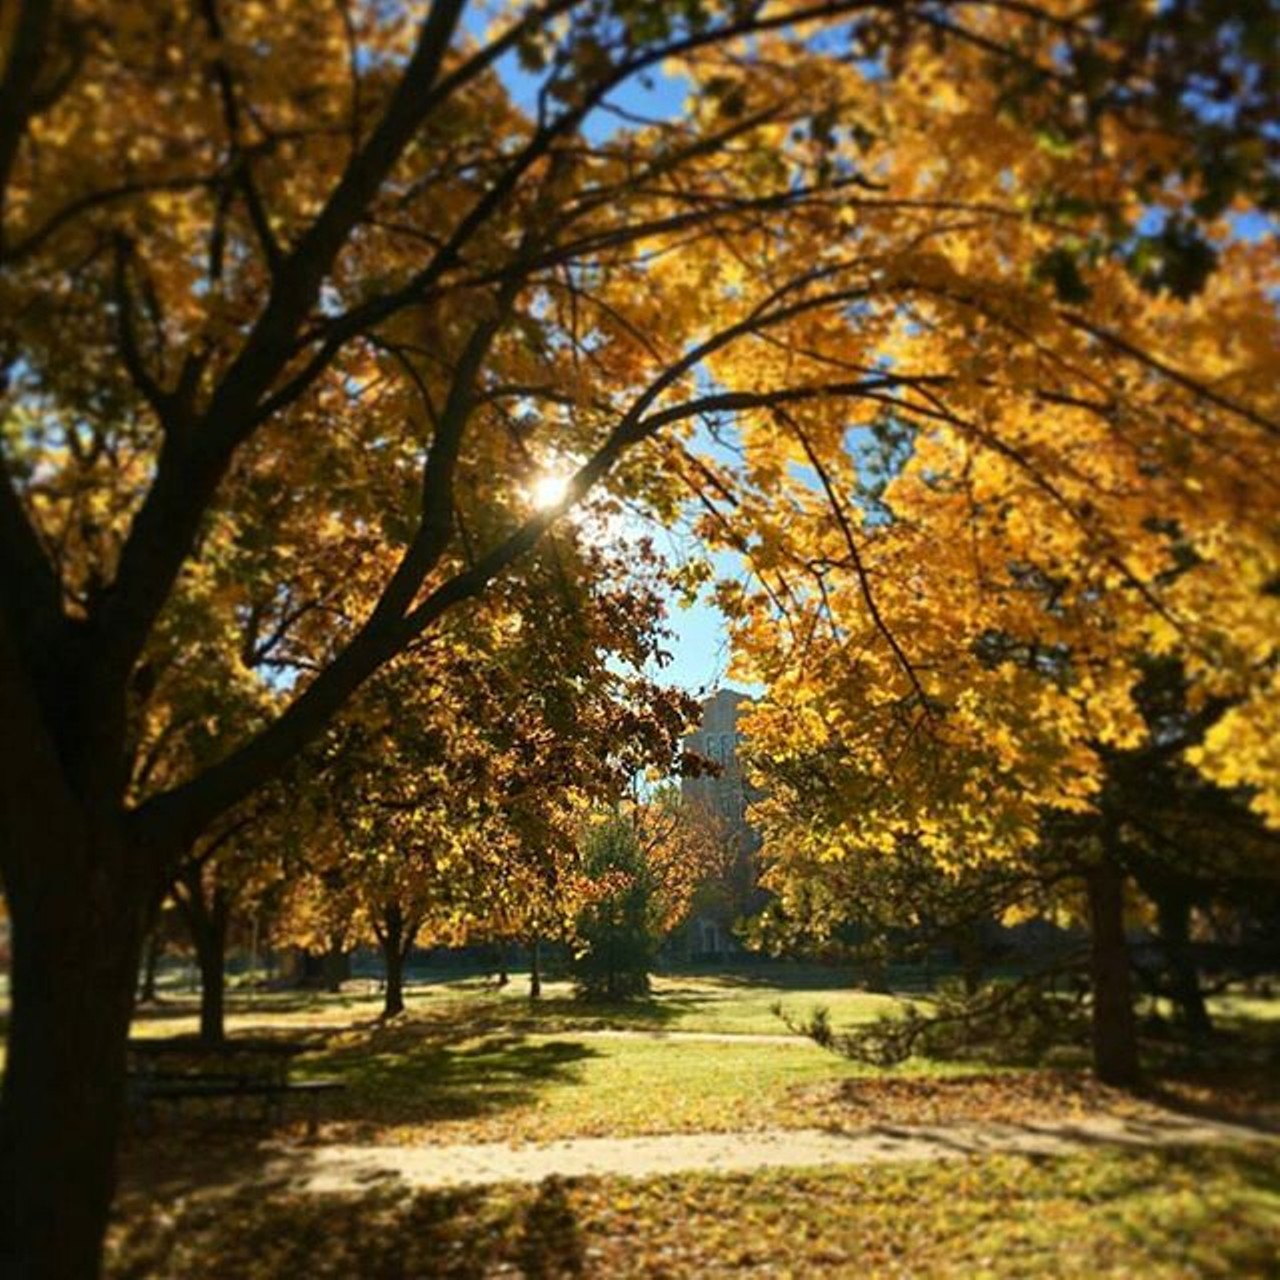 Mount Pleasant
Mount Pleasant is a good place to keep busy. You can explore the campus of Central Michigan University, dine, and go shopping. It is a lively and fun area to look at the sights of fall. Photo via Instagram user,  mtpleasantcvb